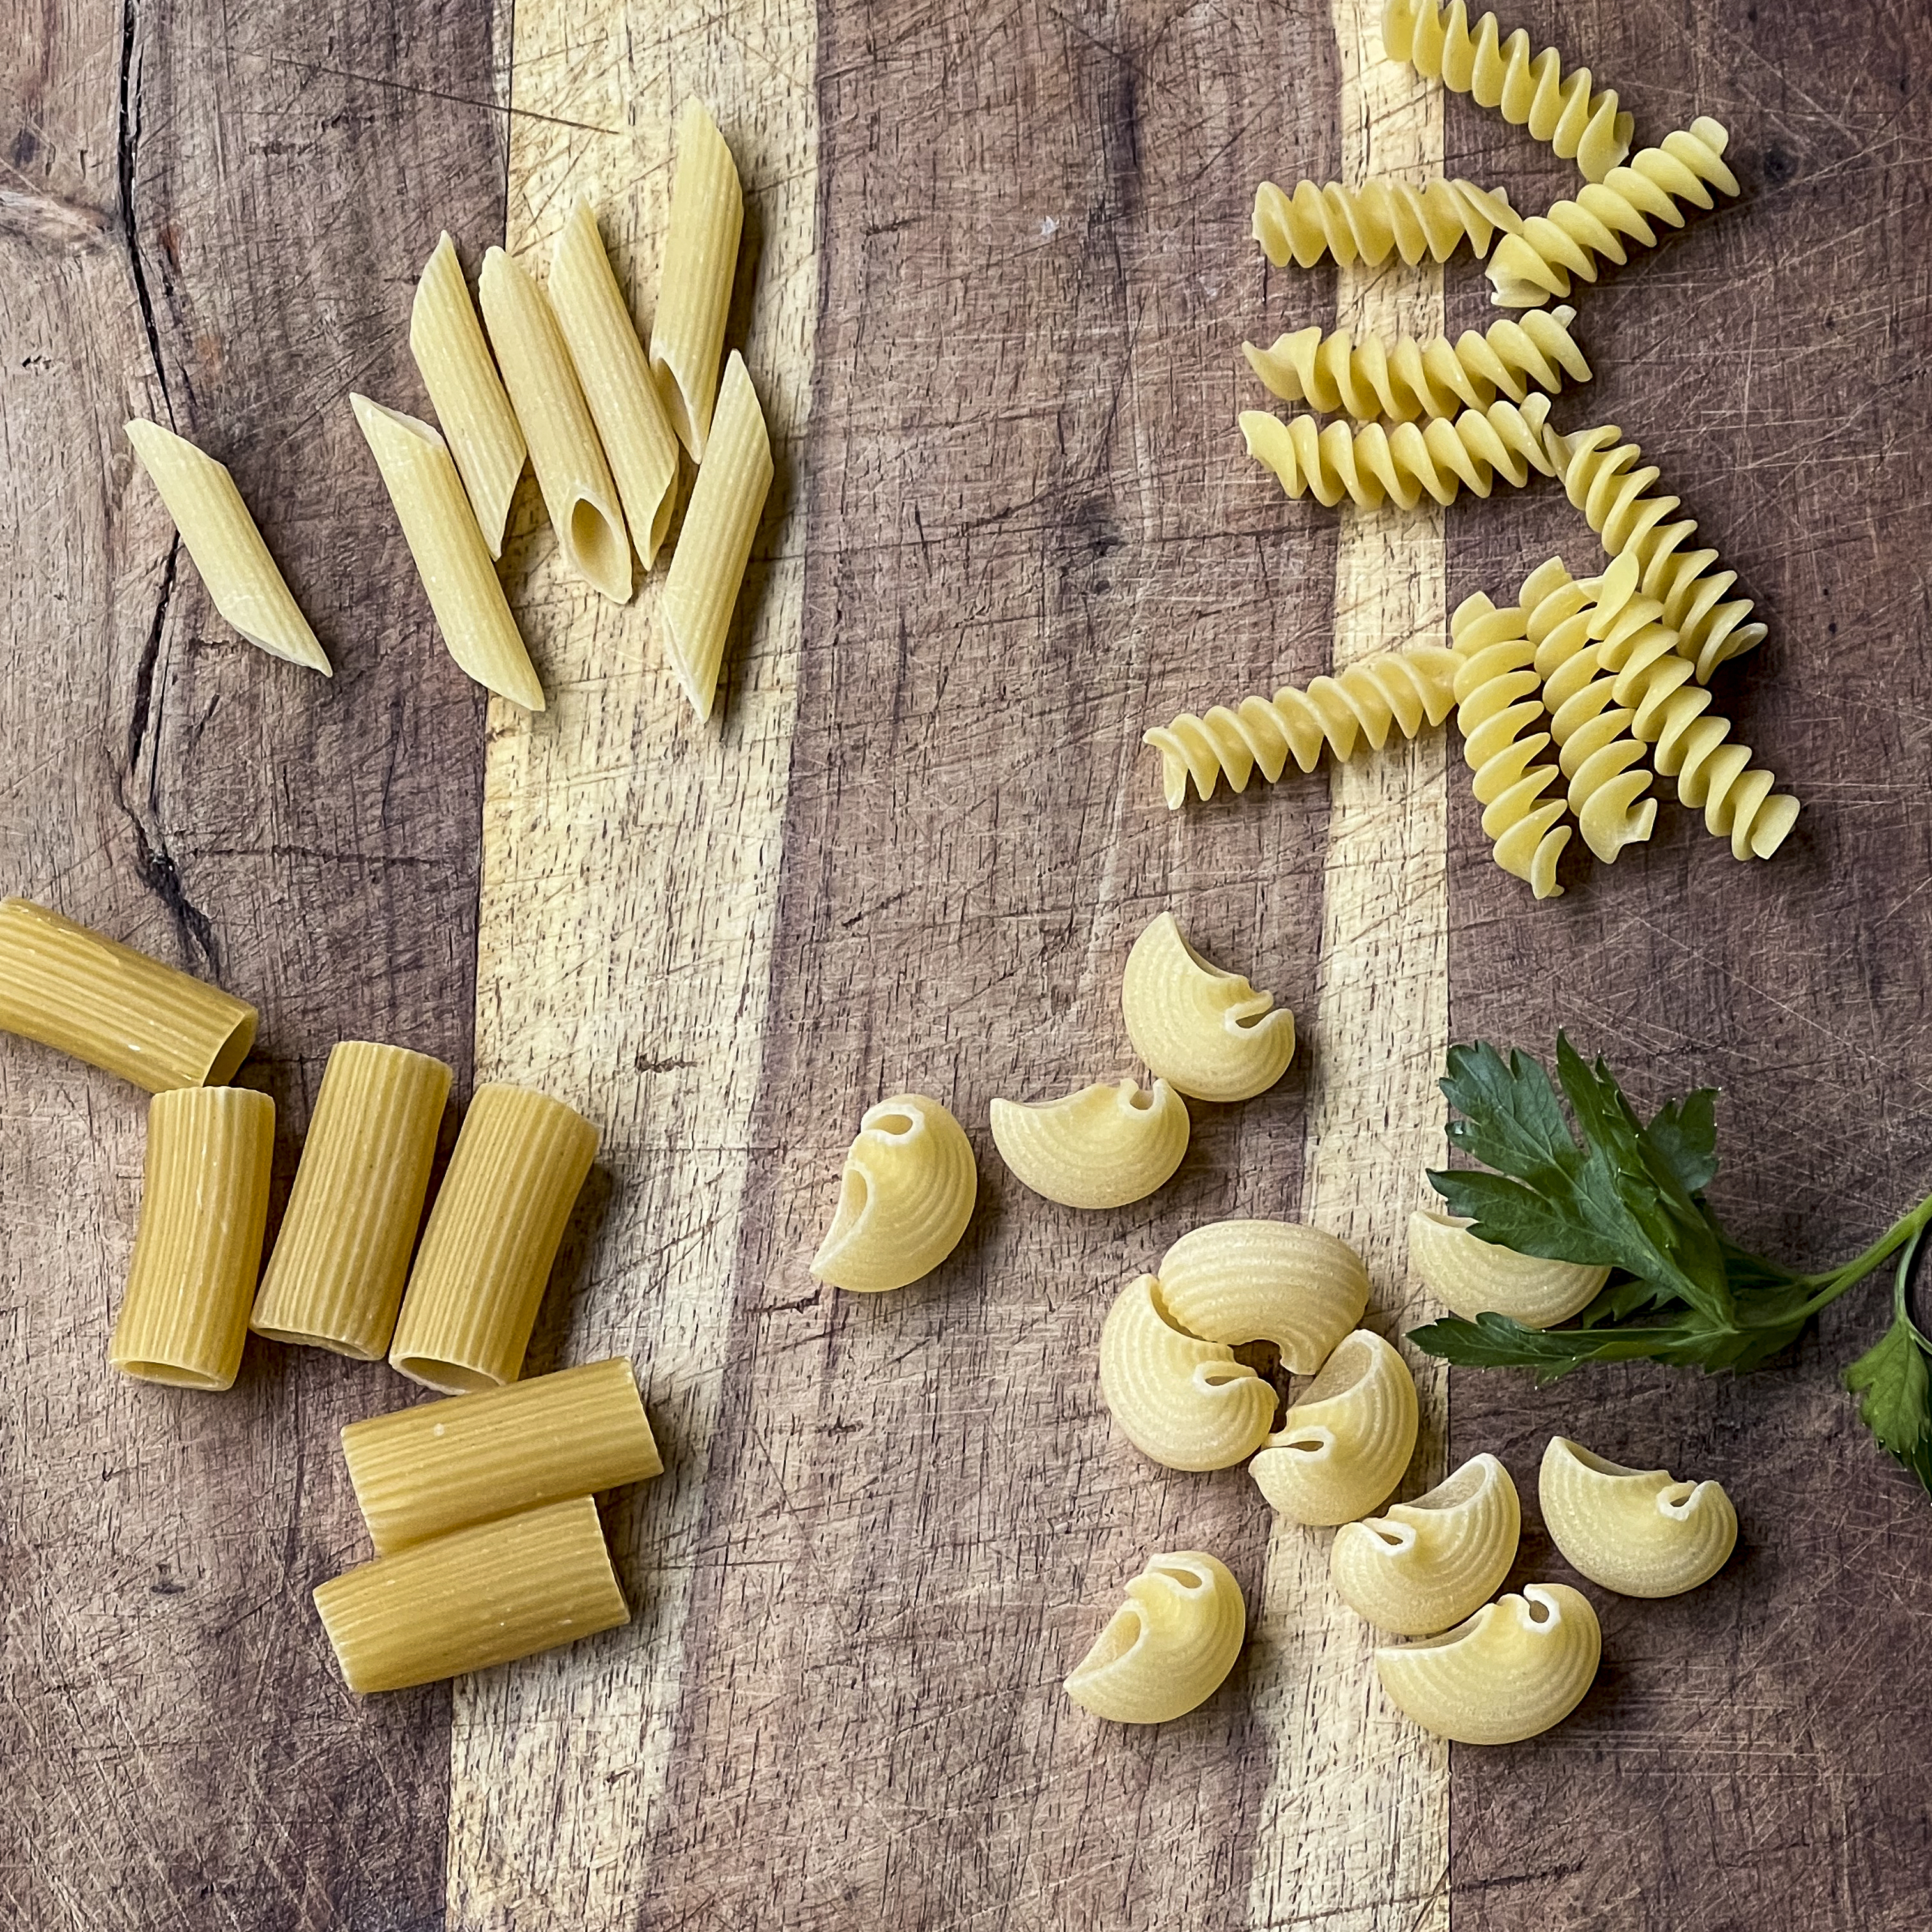 A photo showing many types of pasta that are appropriate for macaroni and cheese.